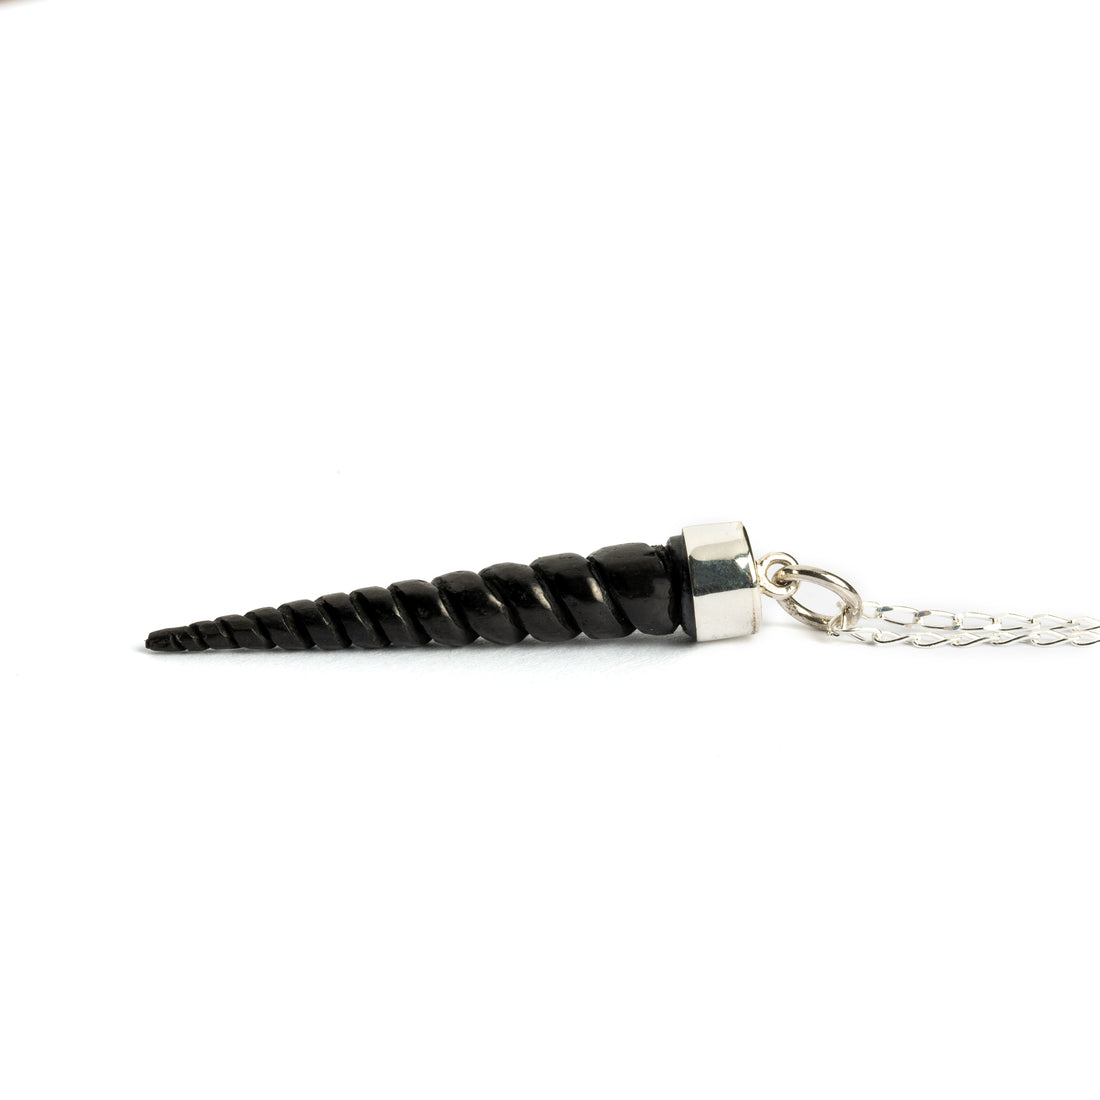 Blackwood unicorn tusk pendent on a silver chain side view